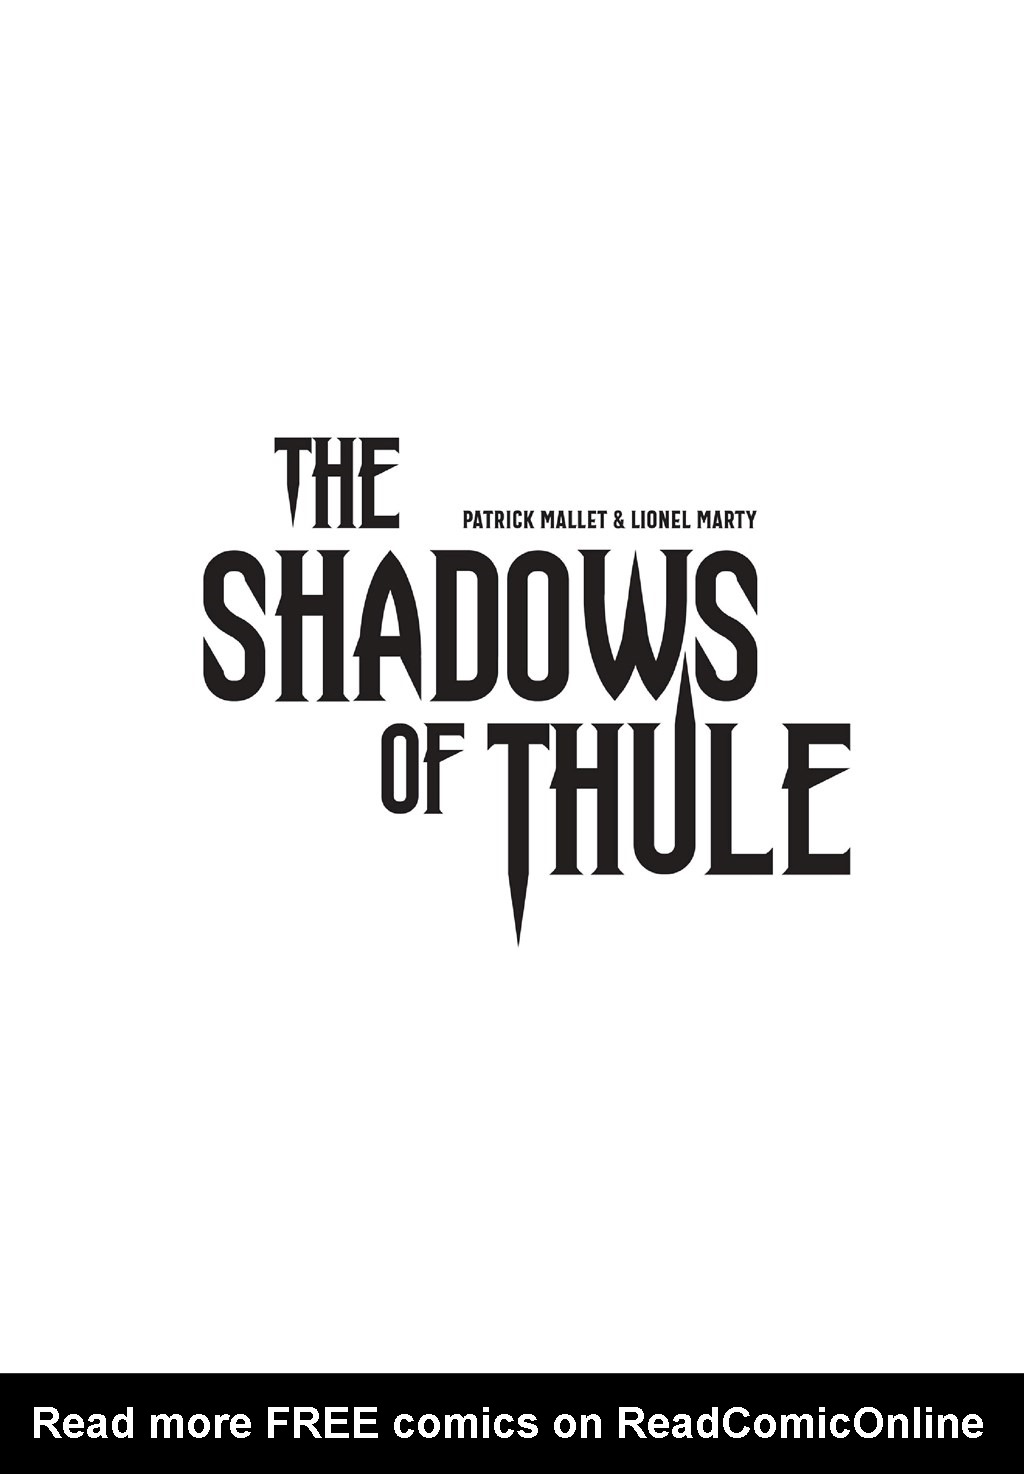 Read online The Shadows of Thule comic -  Issue # TPB - 2